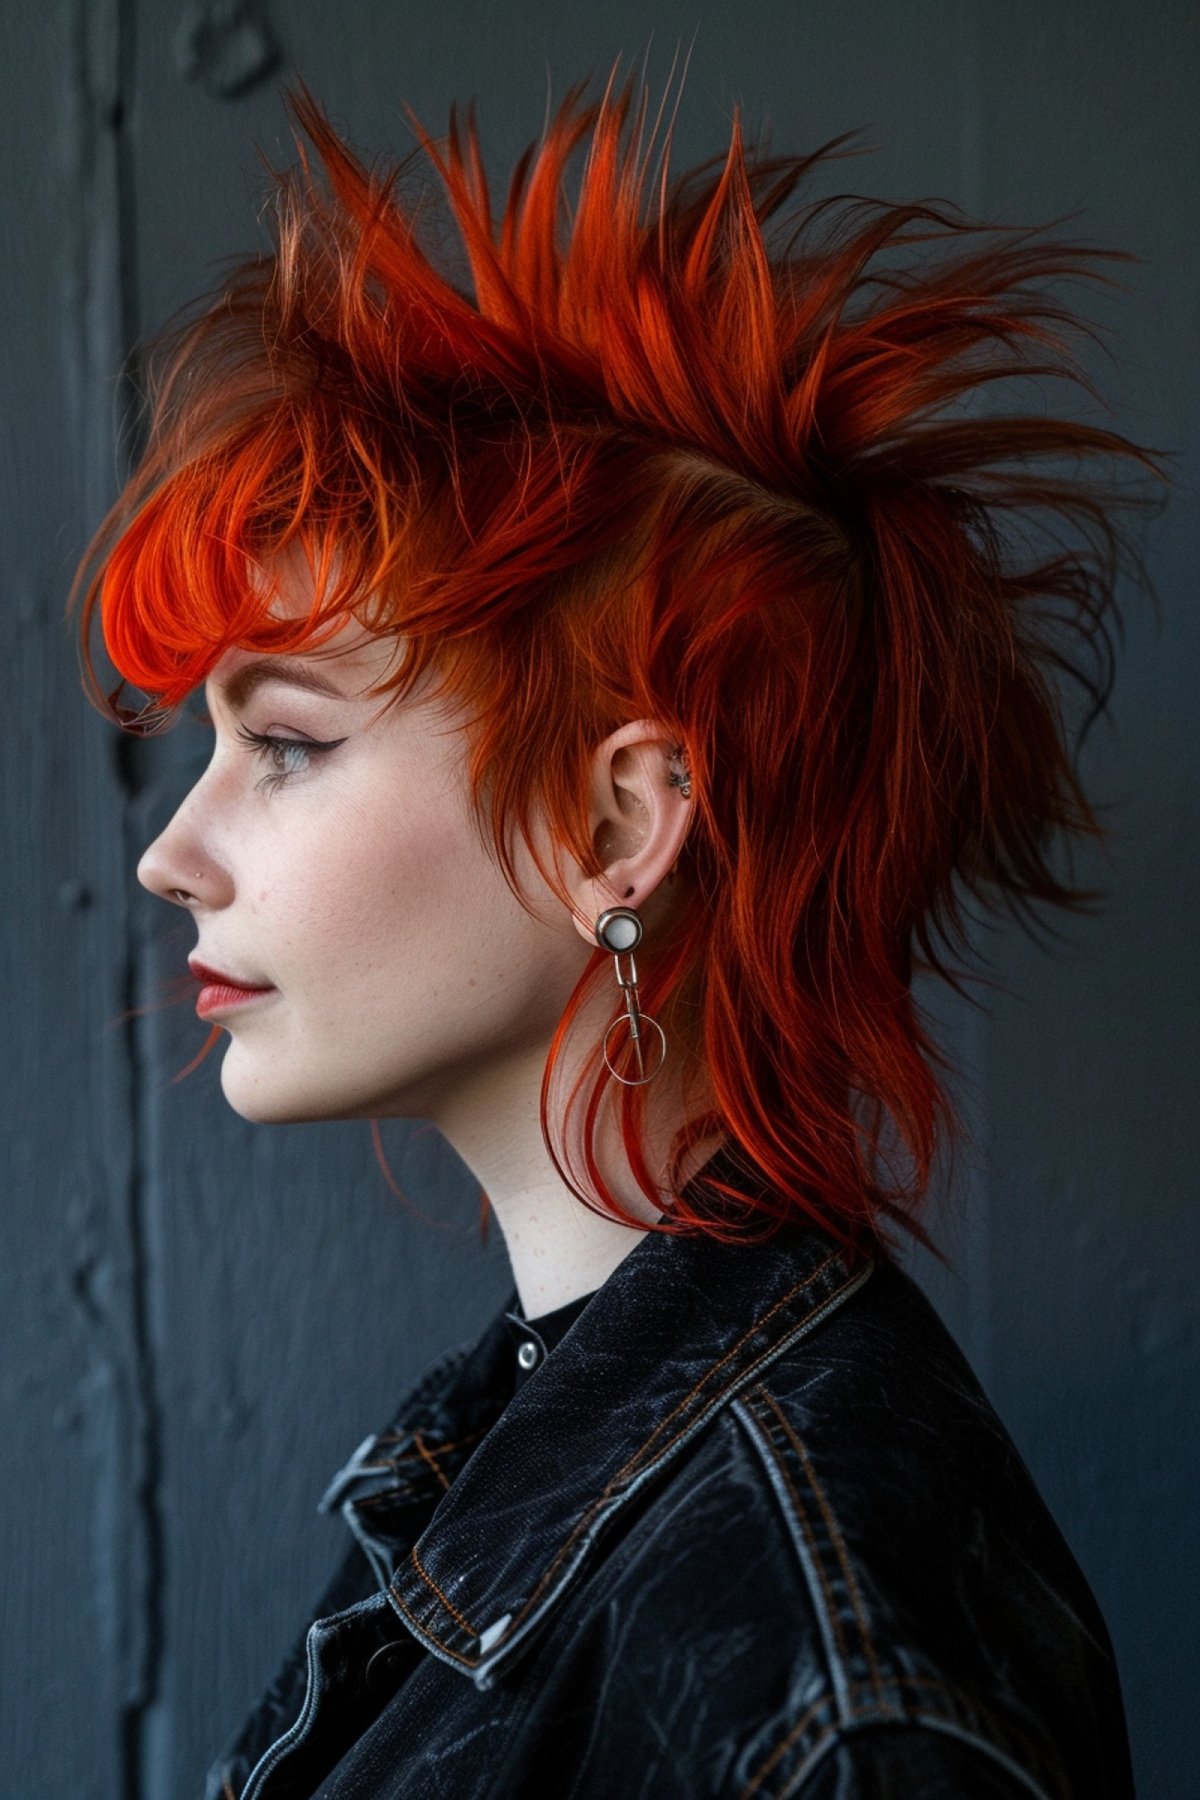 Woman with Fiery Orange Tousled Spiky Hairstyle